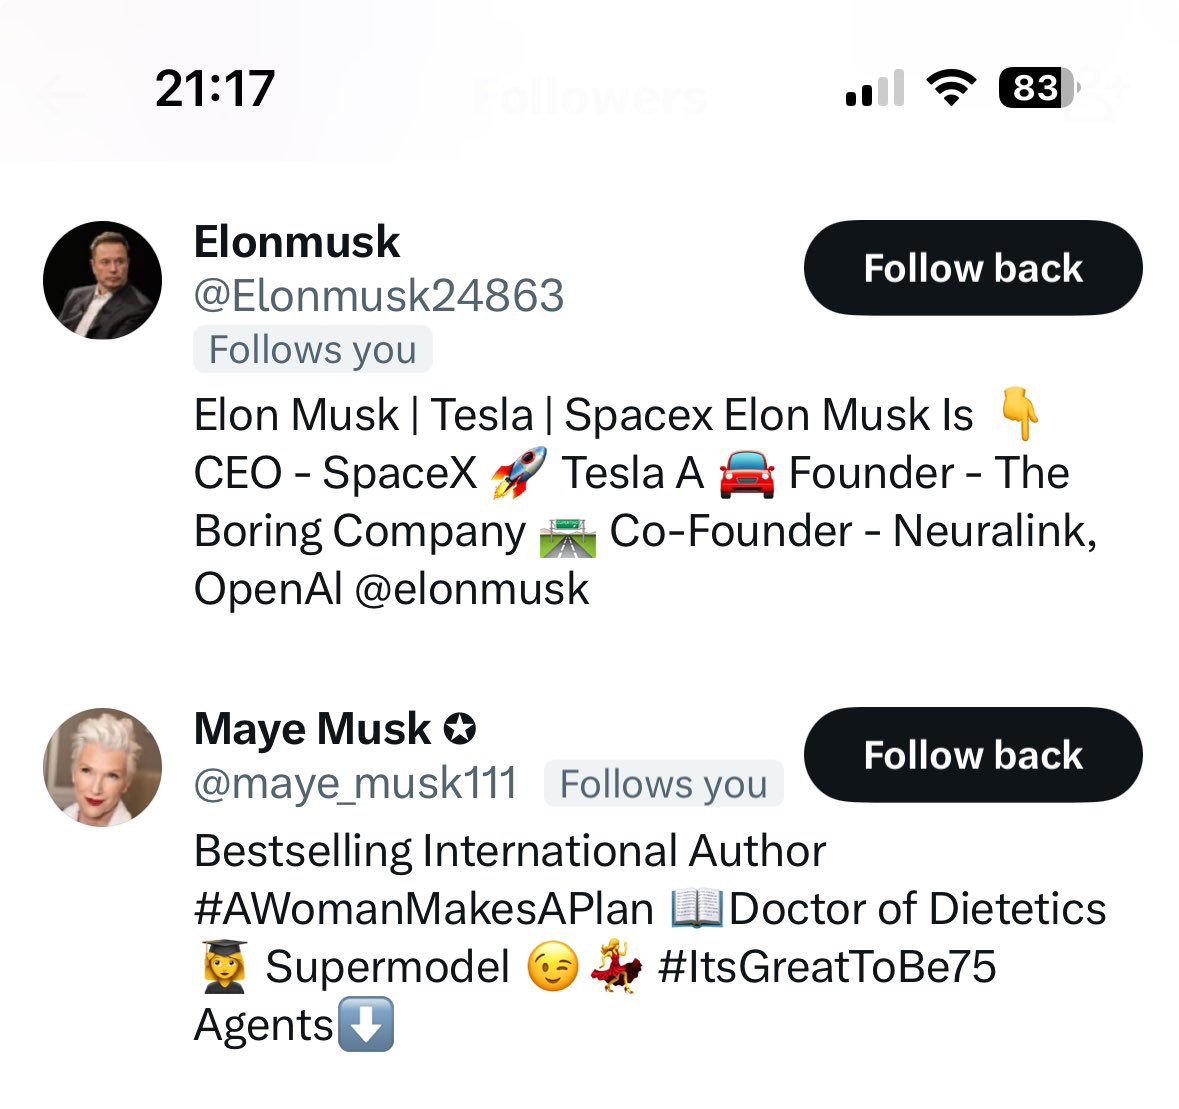 I’m so glad @elonmusk took over @twitter and finally sorted out the bot and fake account problem once and for all #sarcasm